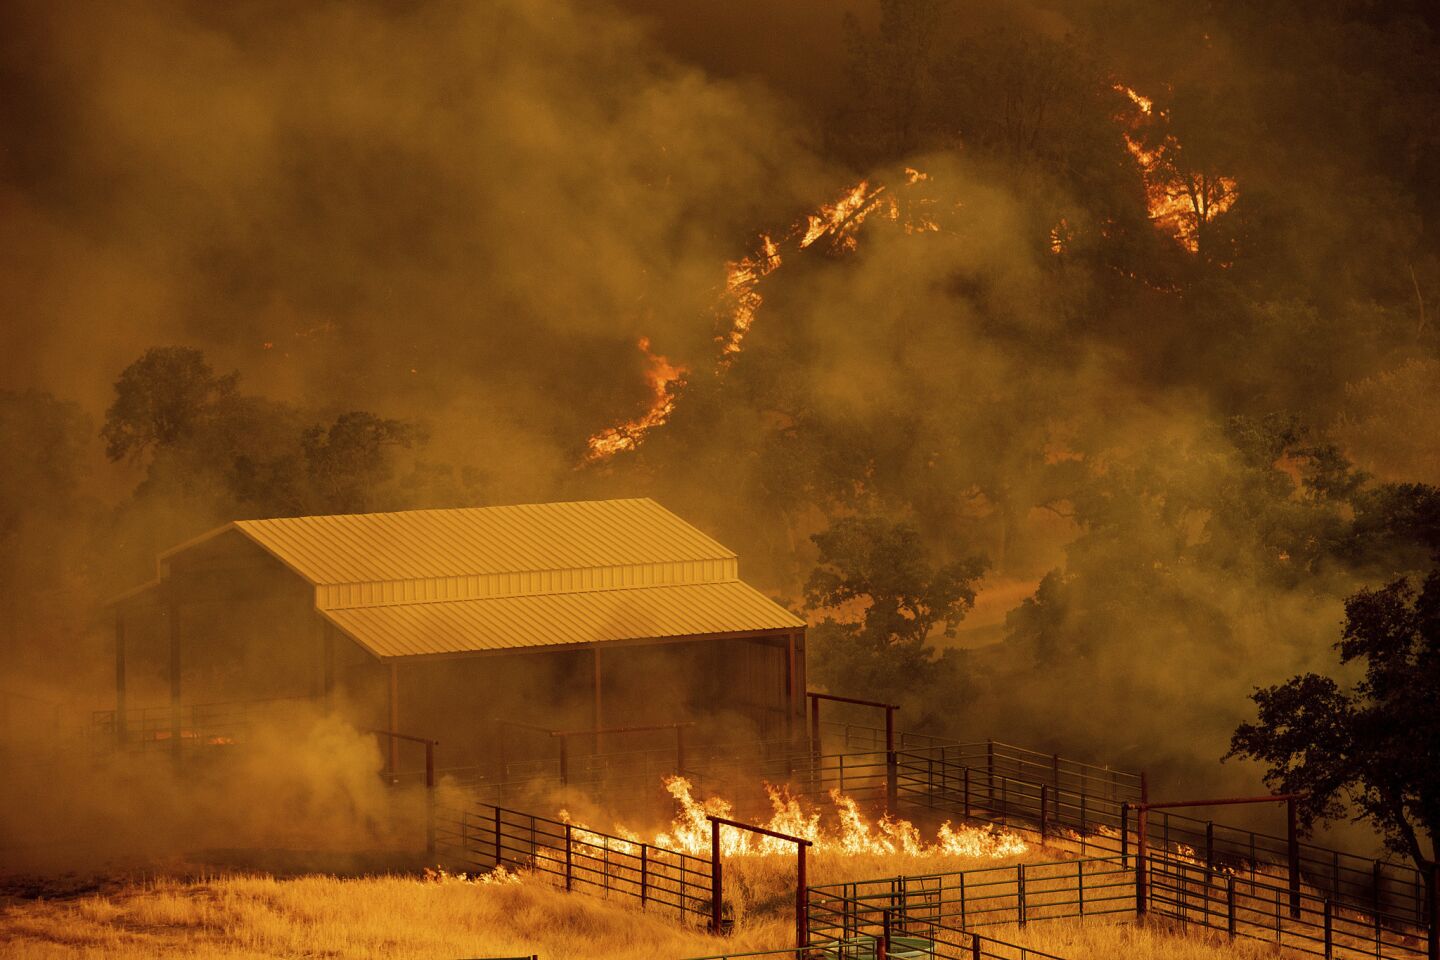 Flames rise around an outbuilding as the County fire burns in Guinda, Calif. Evacuations were ordered as dry, hot winds fueled a wildfire burning out of control in rural Northern California.